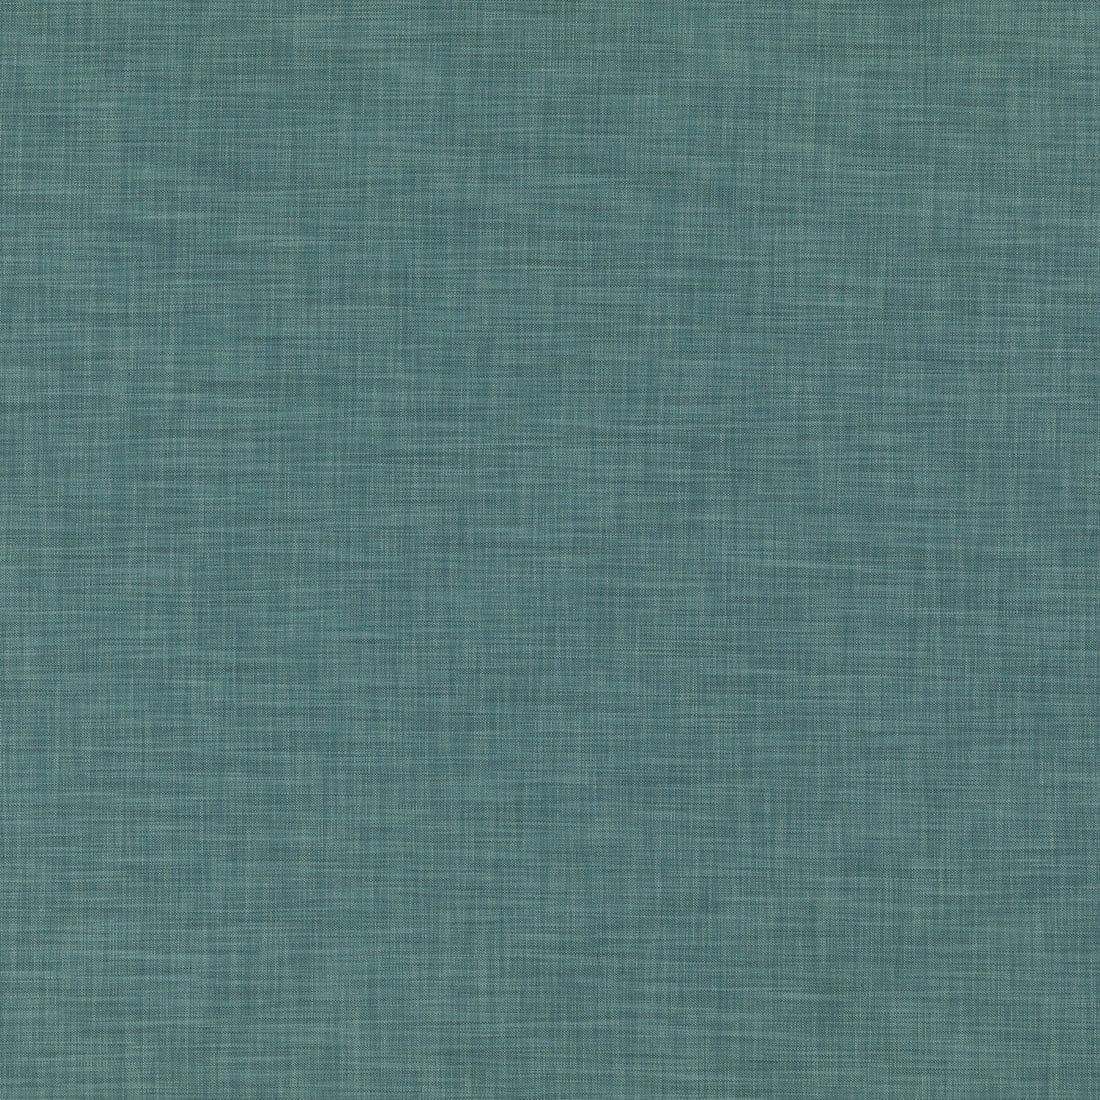 Delamere fabric in teal color - pattern BF10886.615.0 - by G P &amp; J Baker in the Essential Weaves collection